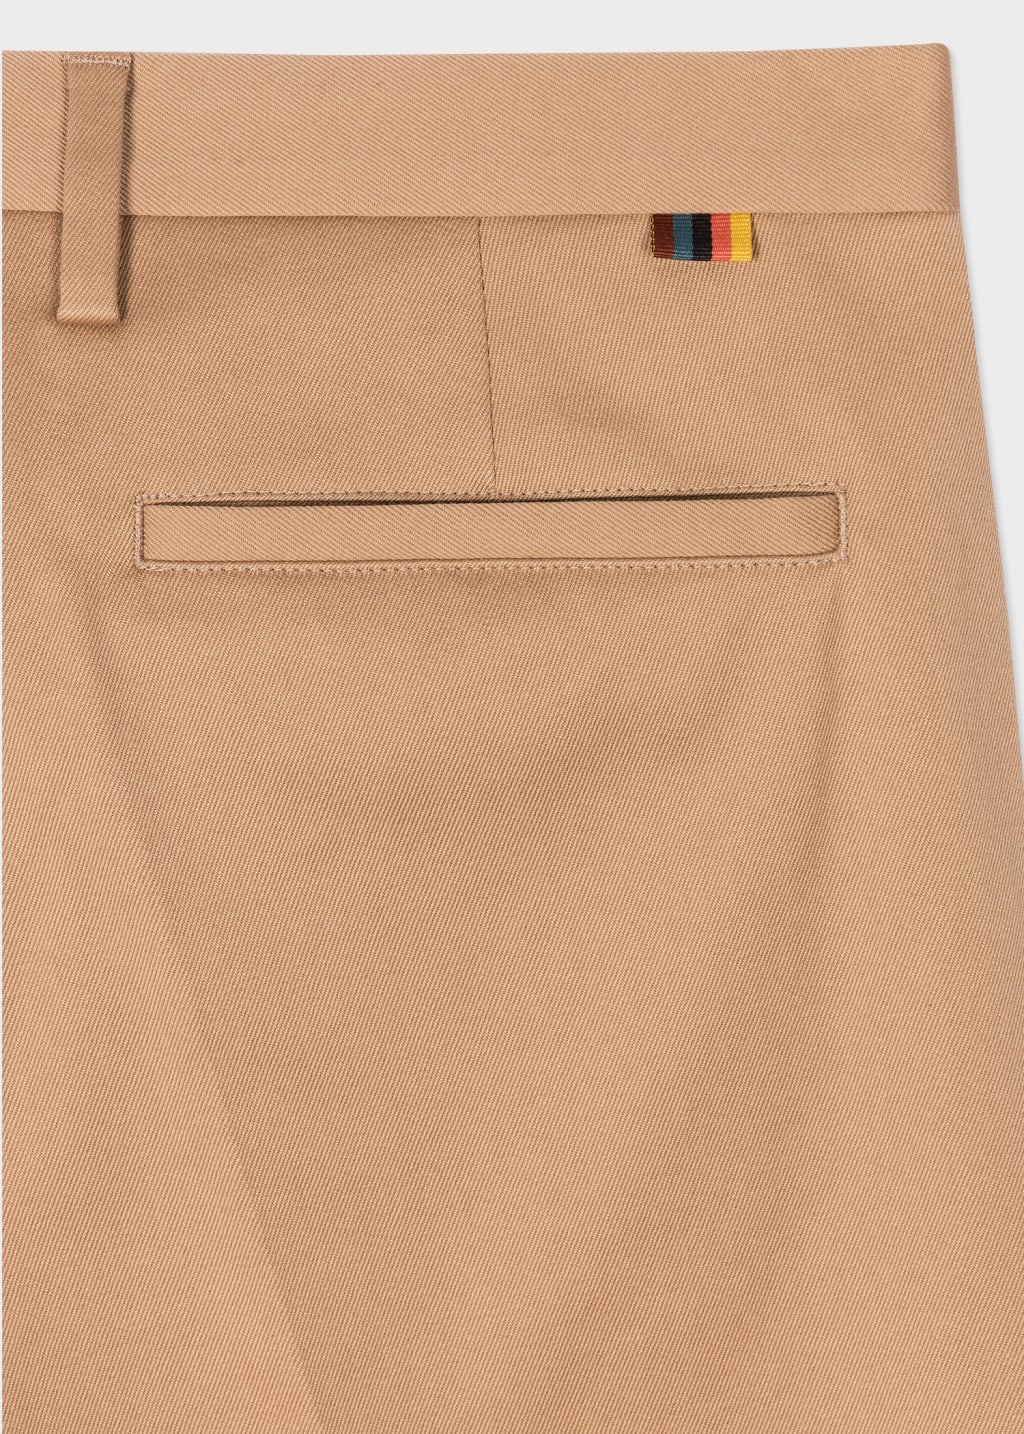 Product View - Slim-Fit Tan Cotton-Stretch Chinos by Paul Smith